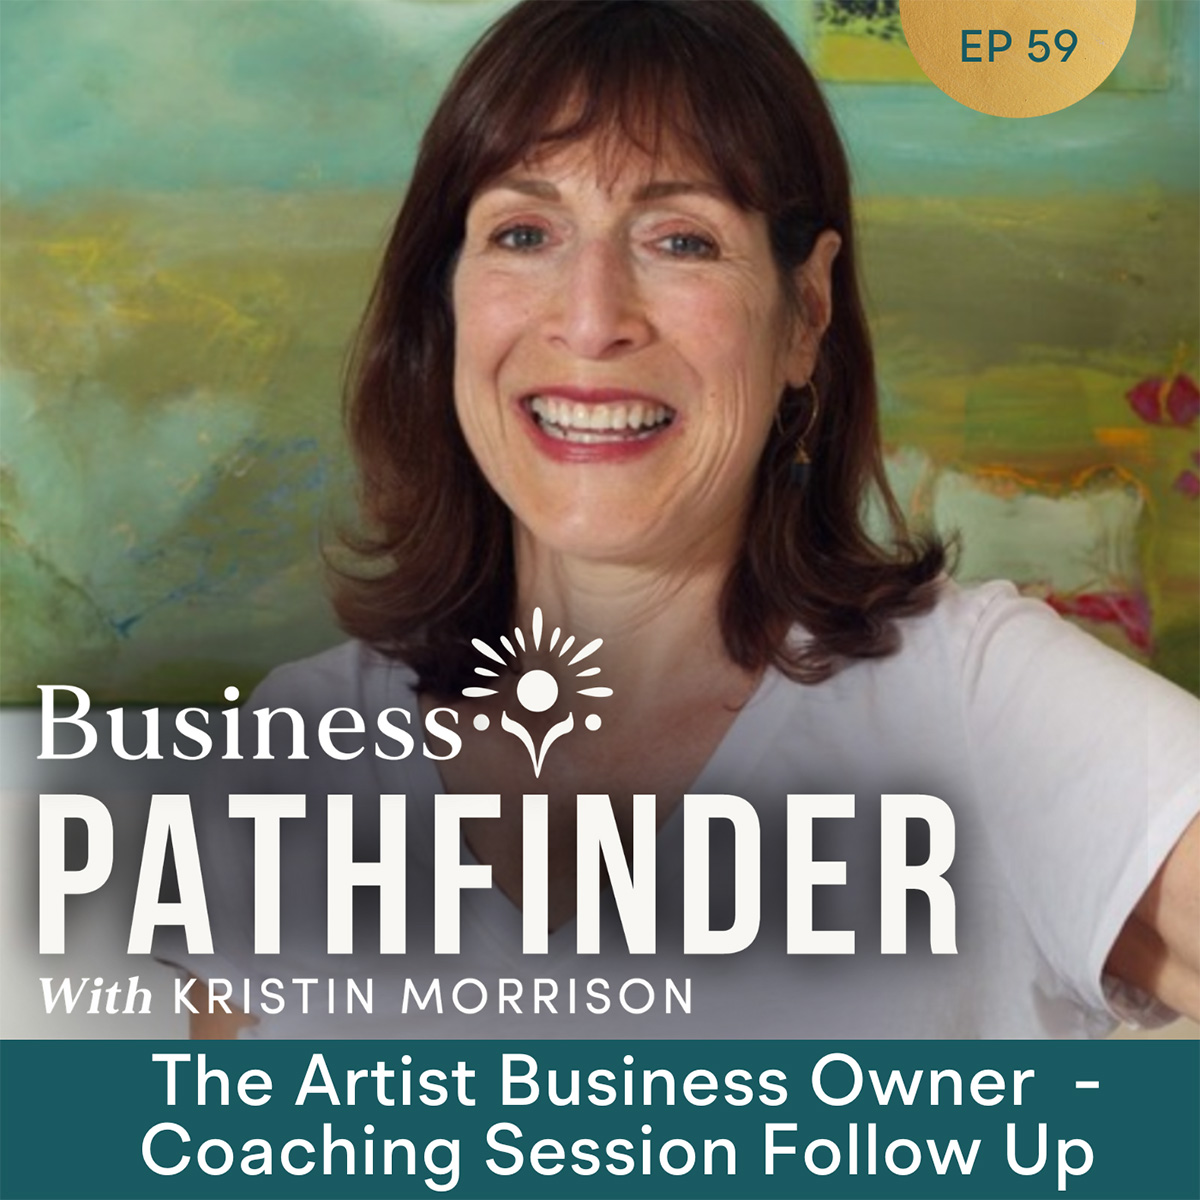 The Artist Business Owner – Coaching Session Follow Up